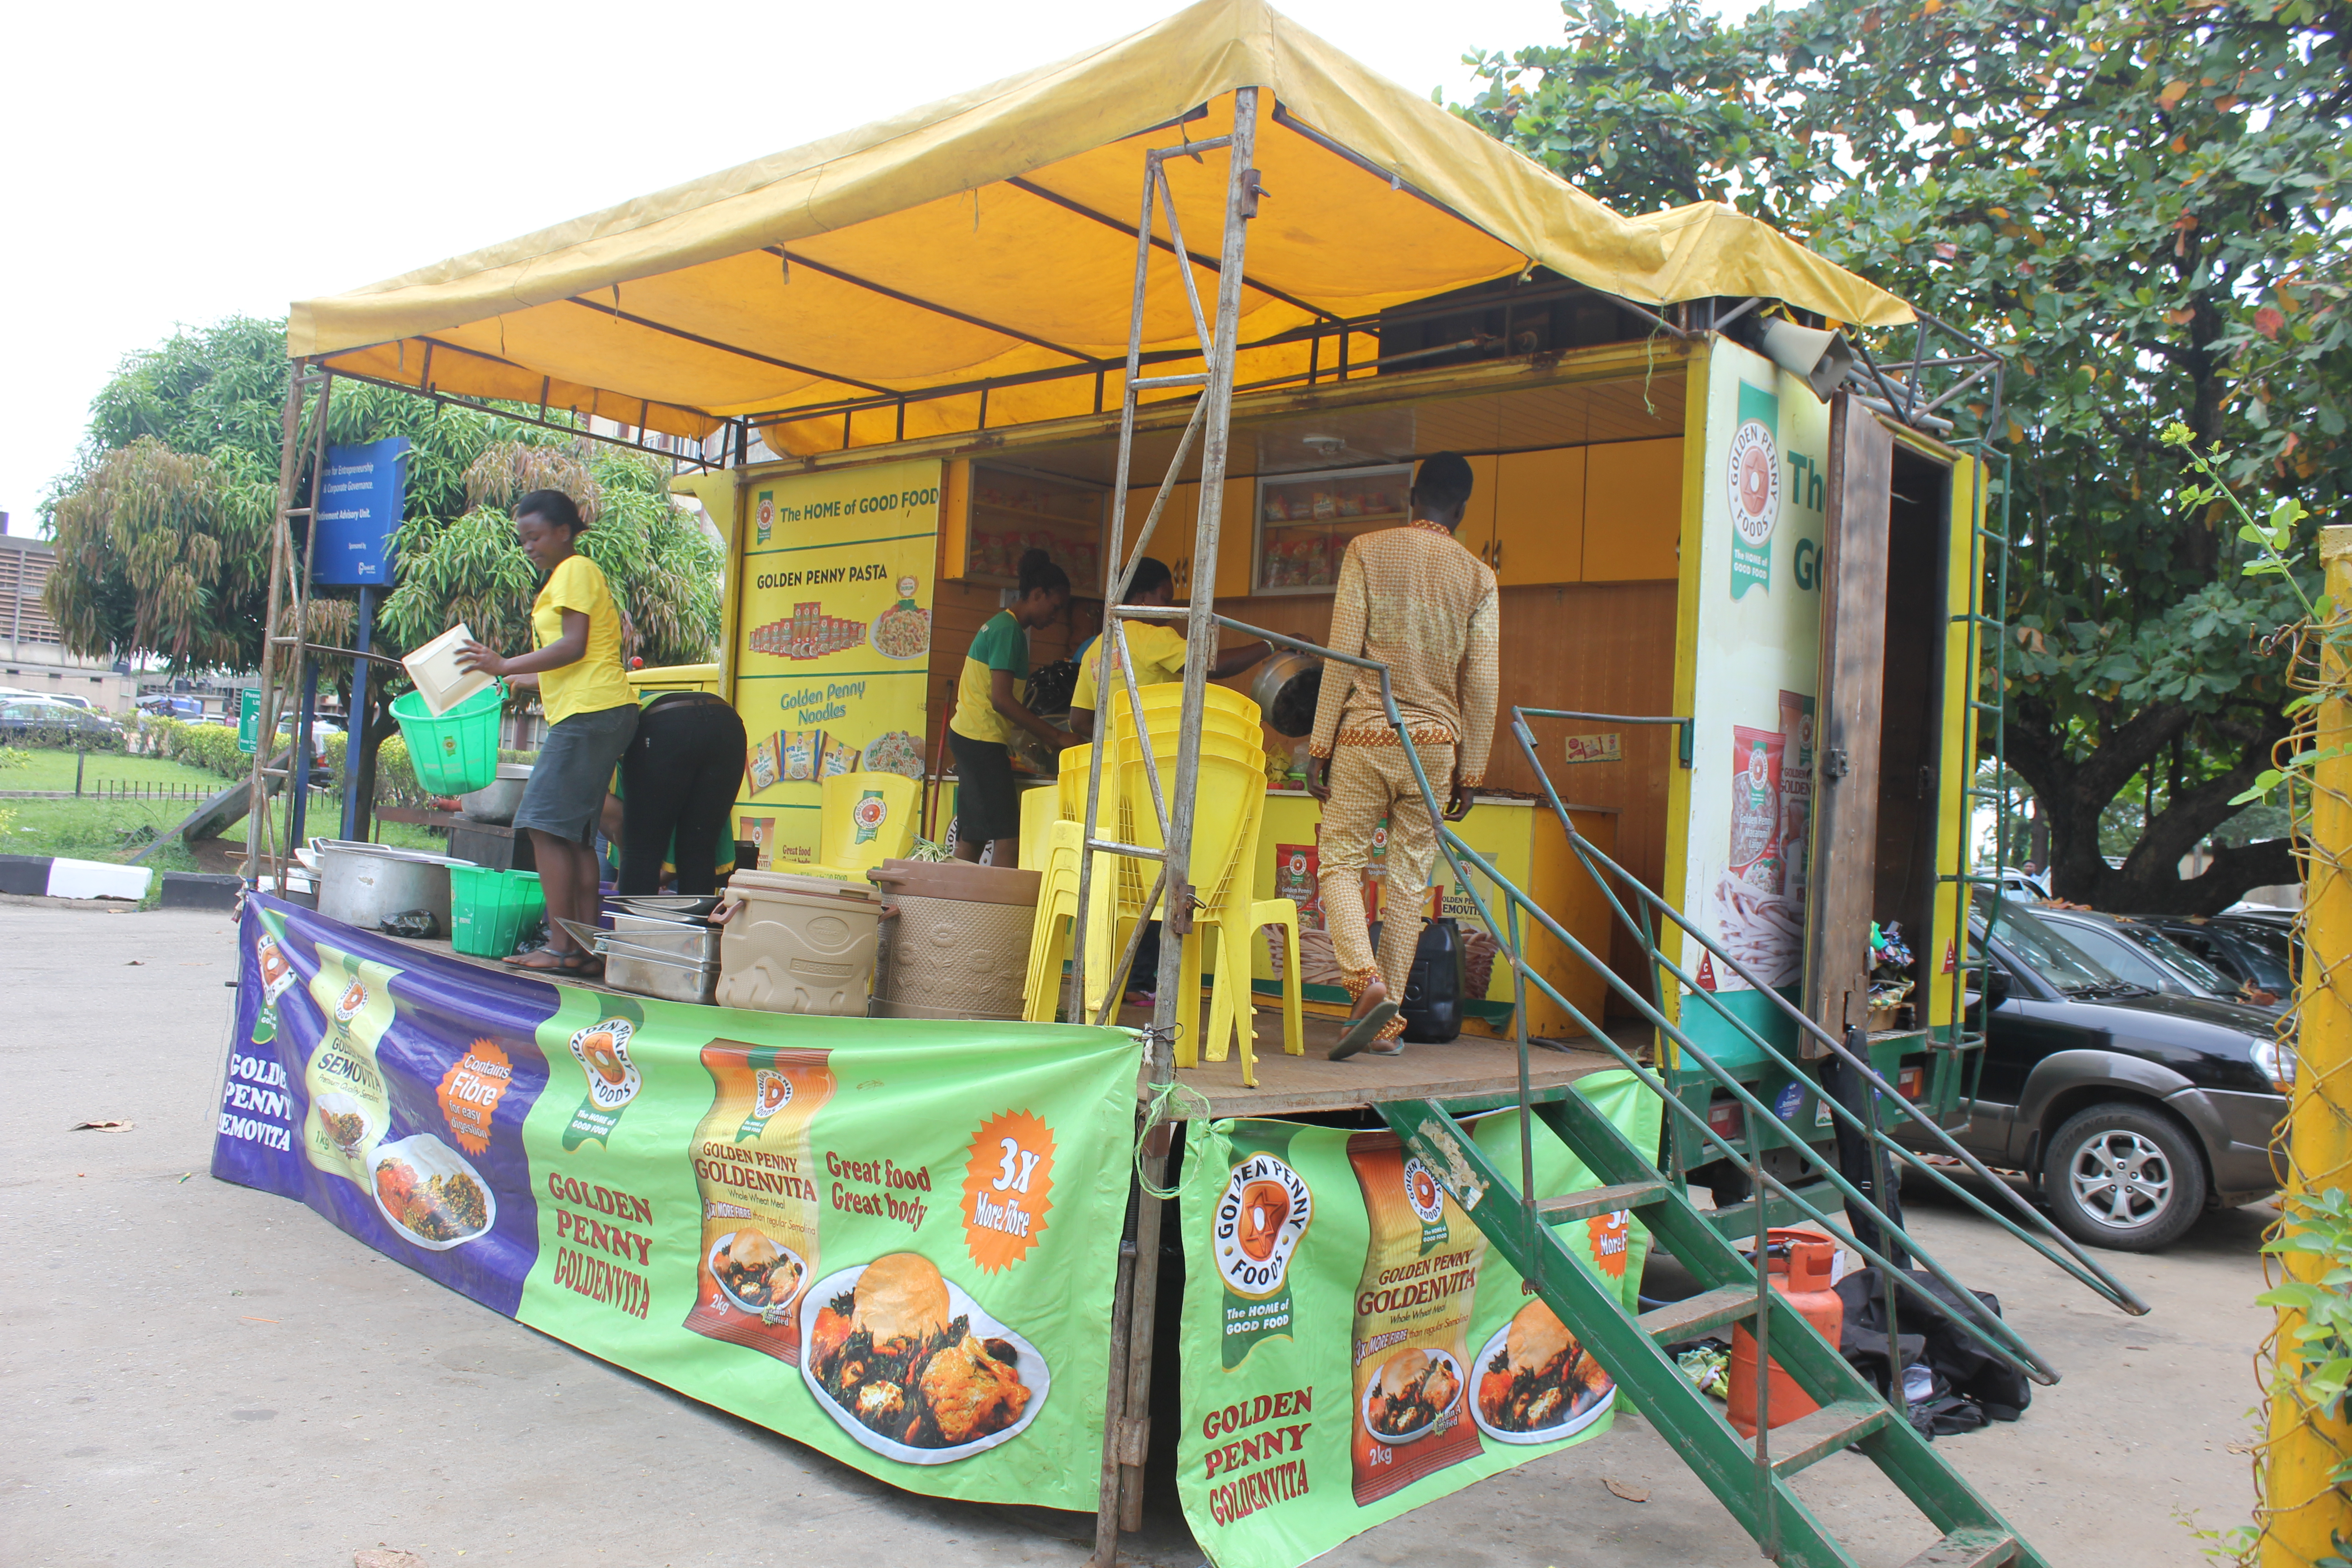 FLOUR MILLS OF NIGERIA SETS UP A MOBILE KITCHEN AT THE EVENT!